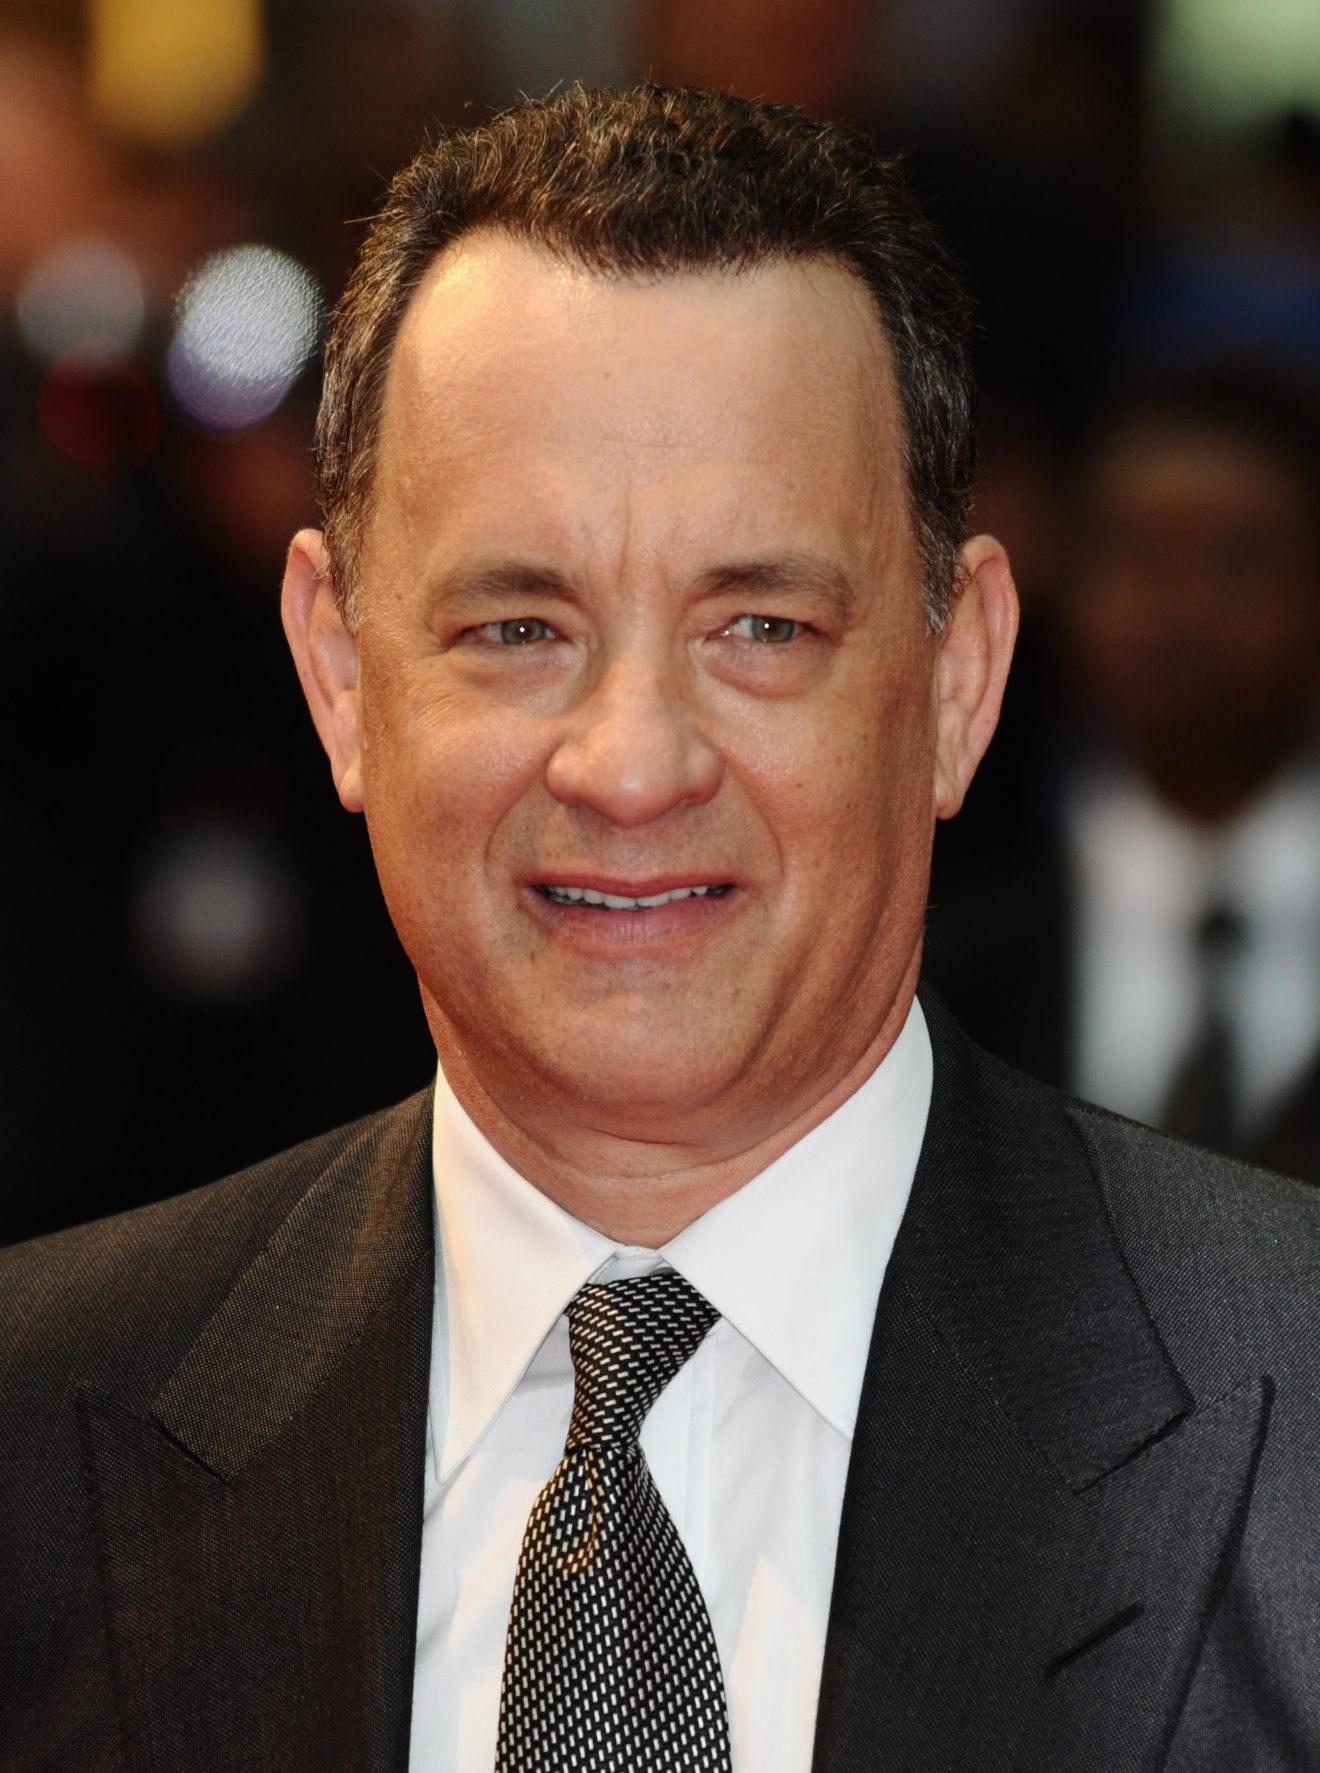 Is Tom Hanks willing to give politics a go?